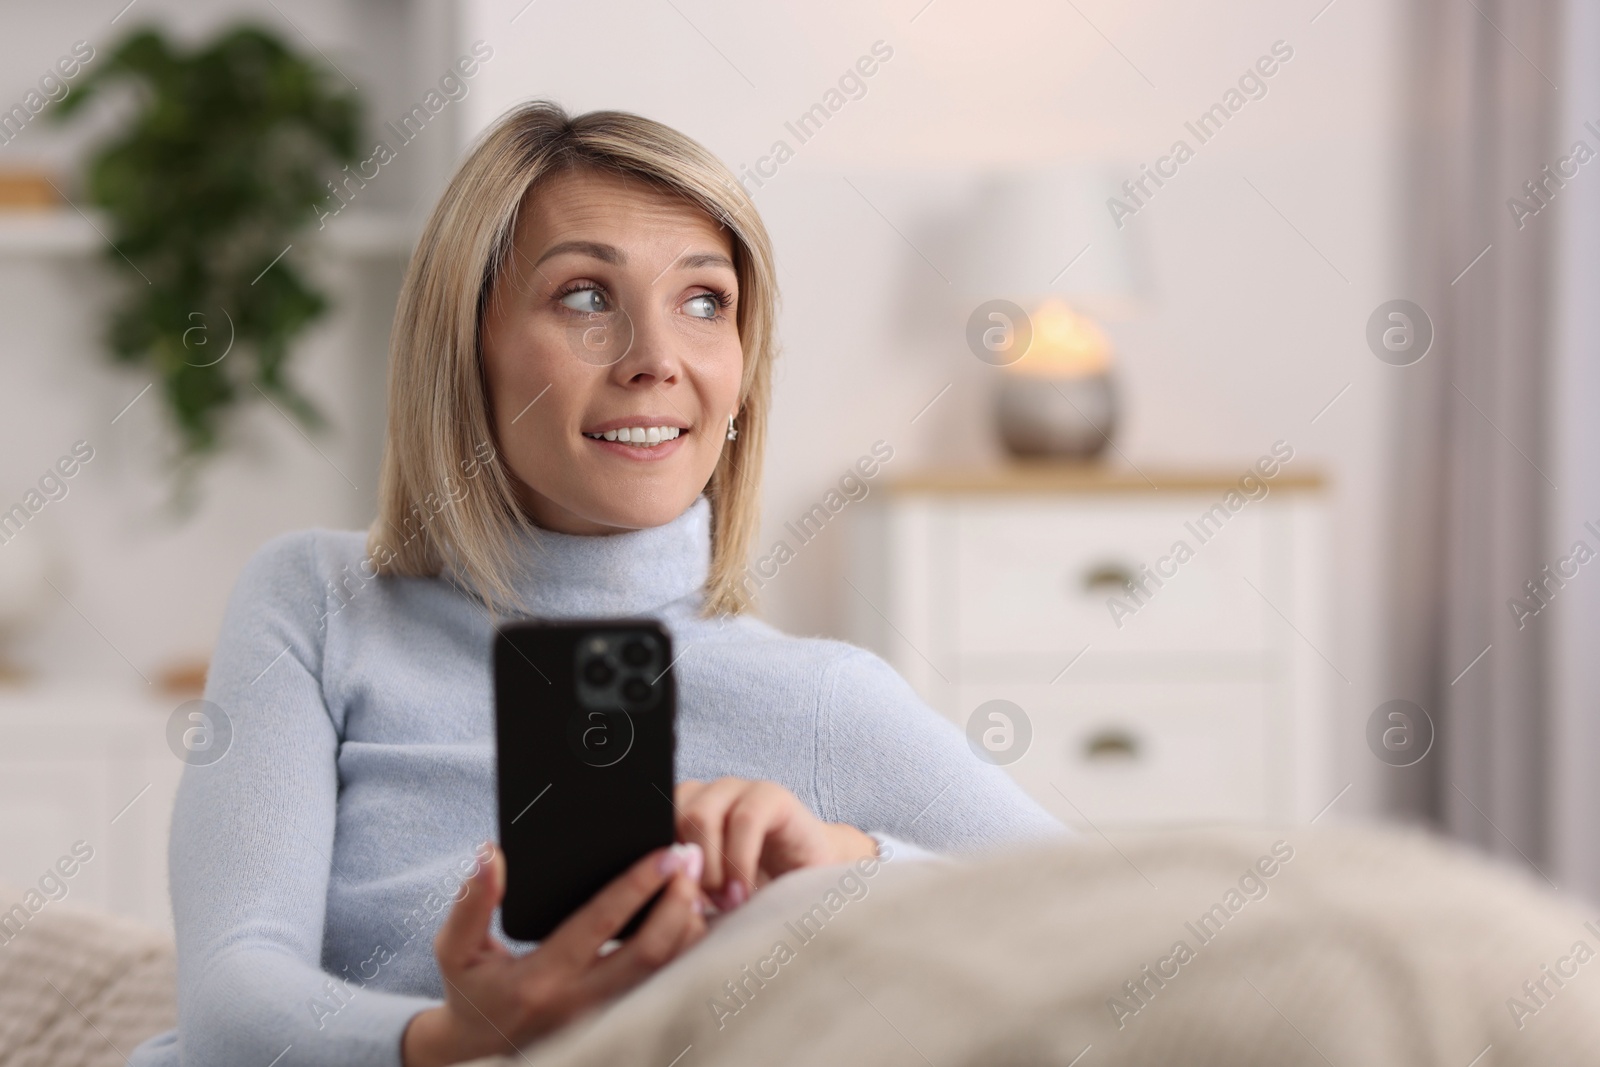 Photo of Happy woman using mobile phone at home, space for text